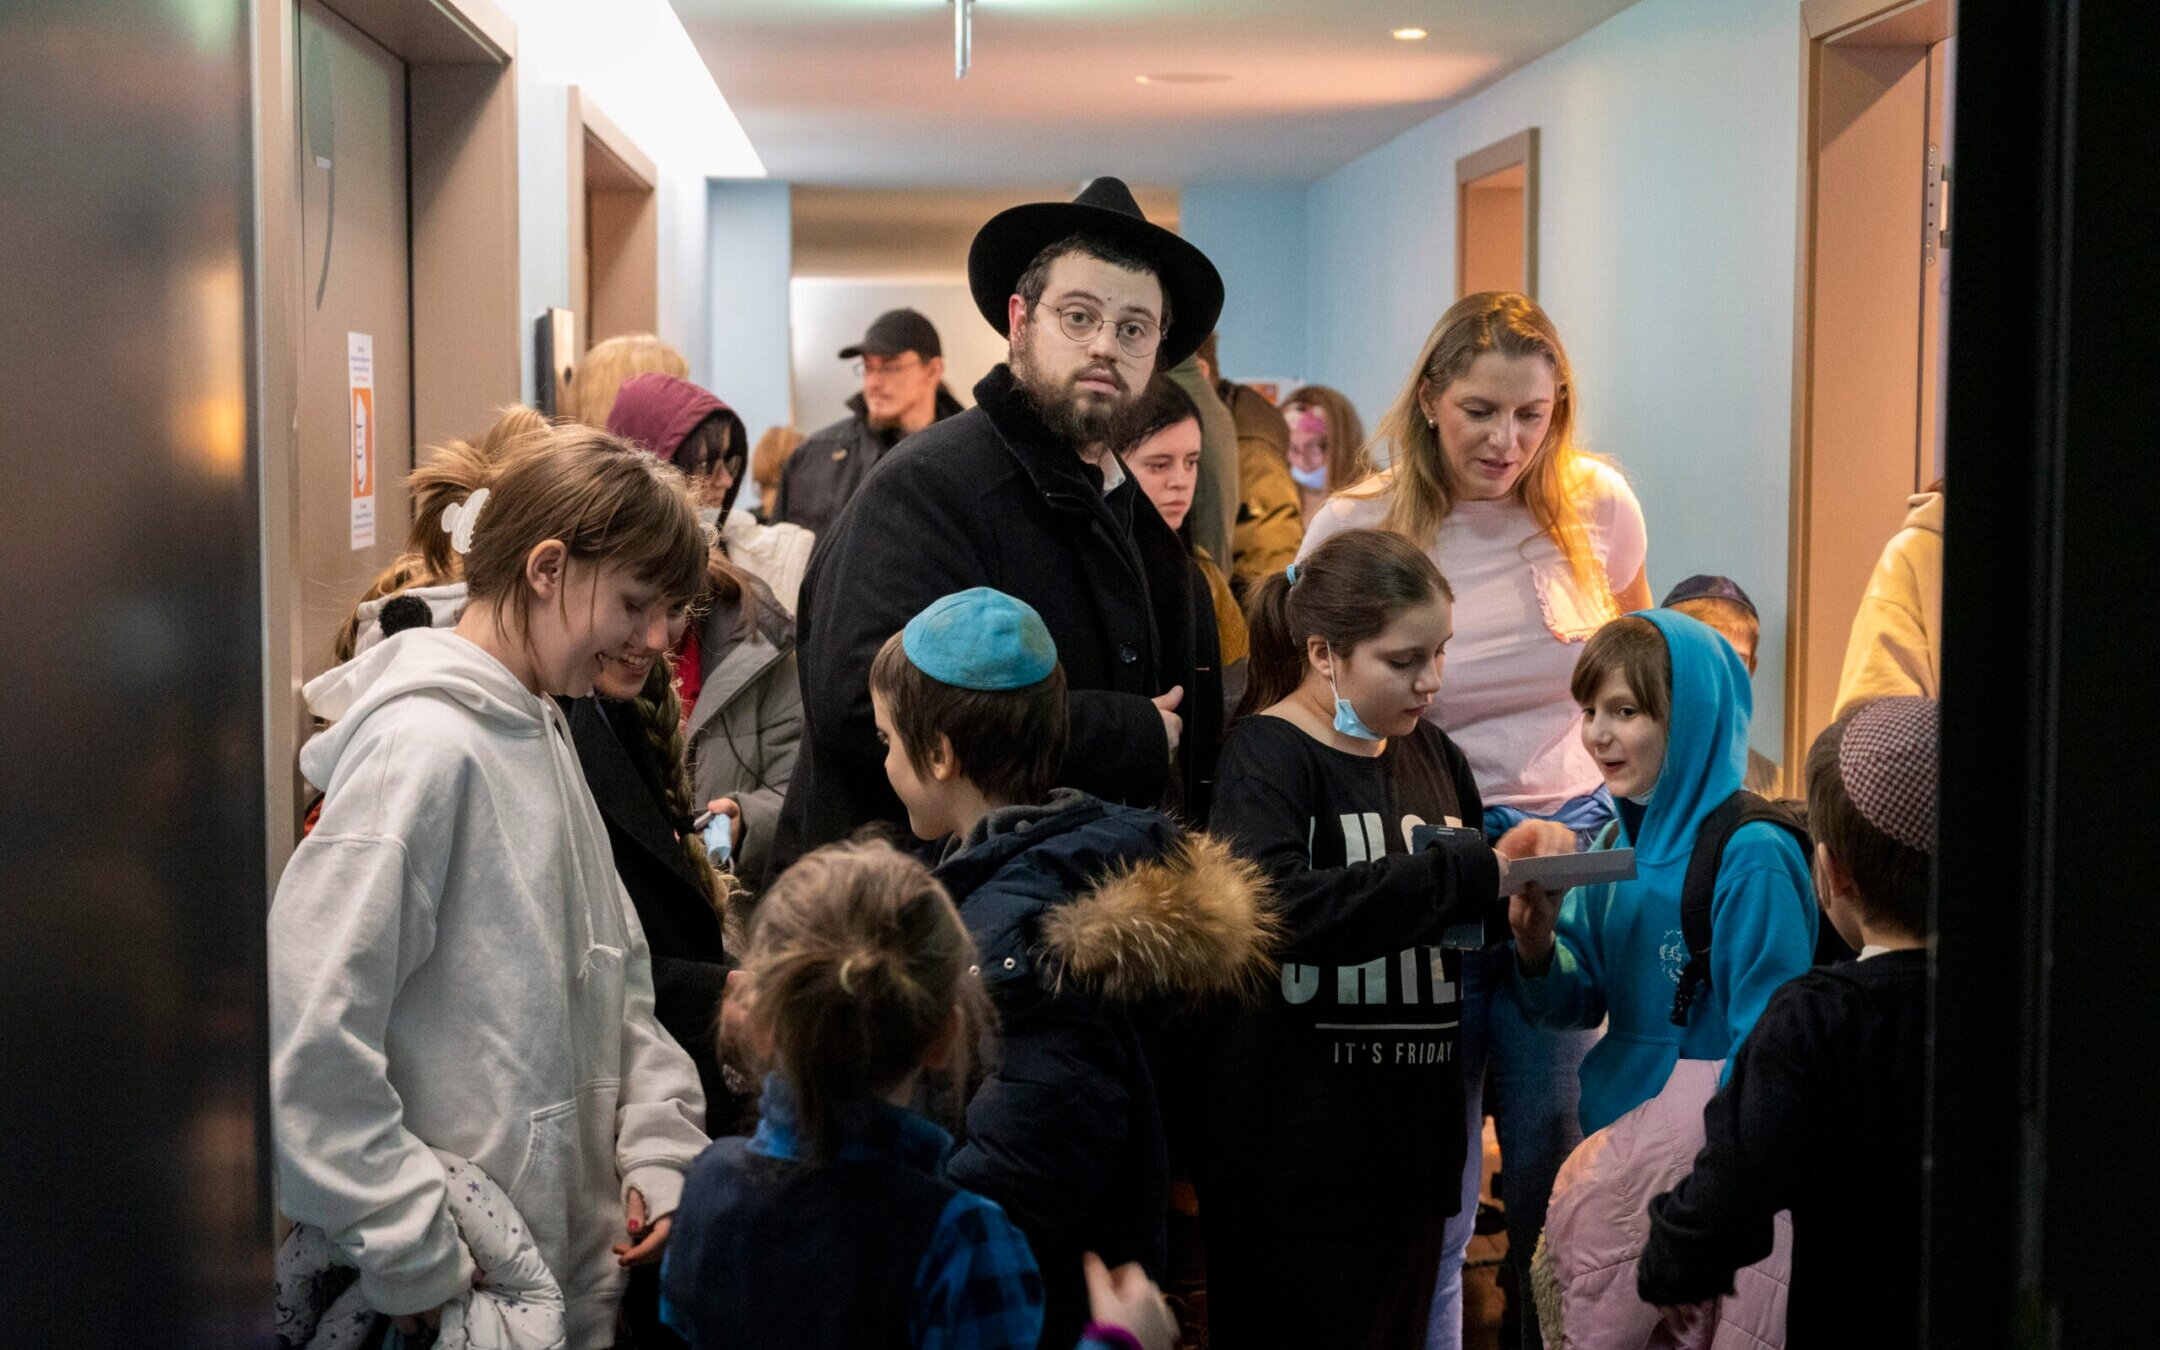 Rabbi Mendy Wolff stands in a hallway in a hotel among children he brought from a Jewish orphanage in Odessa, Ukraine. (Christophe Gateau/picture alliance via Getty Images)